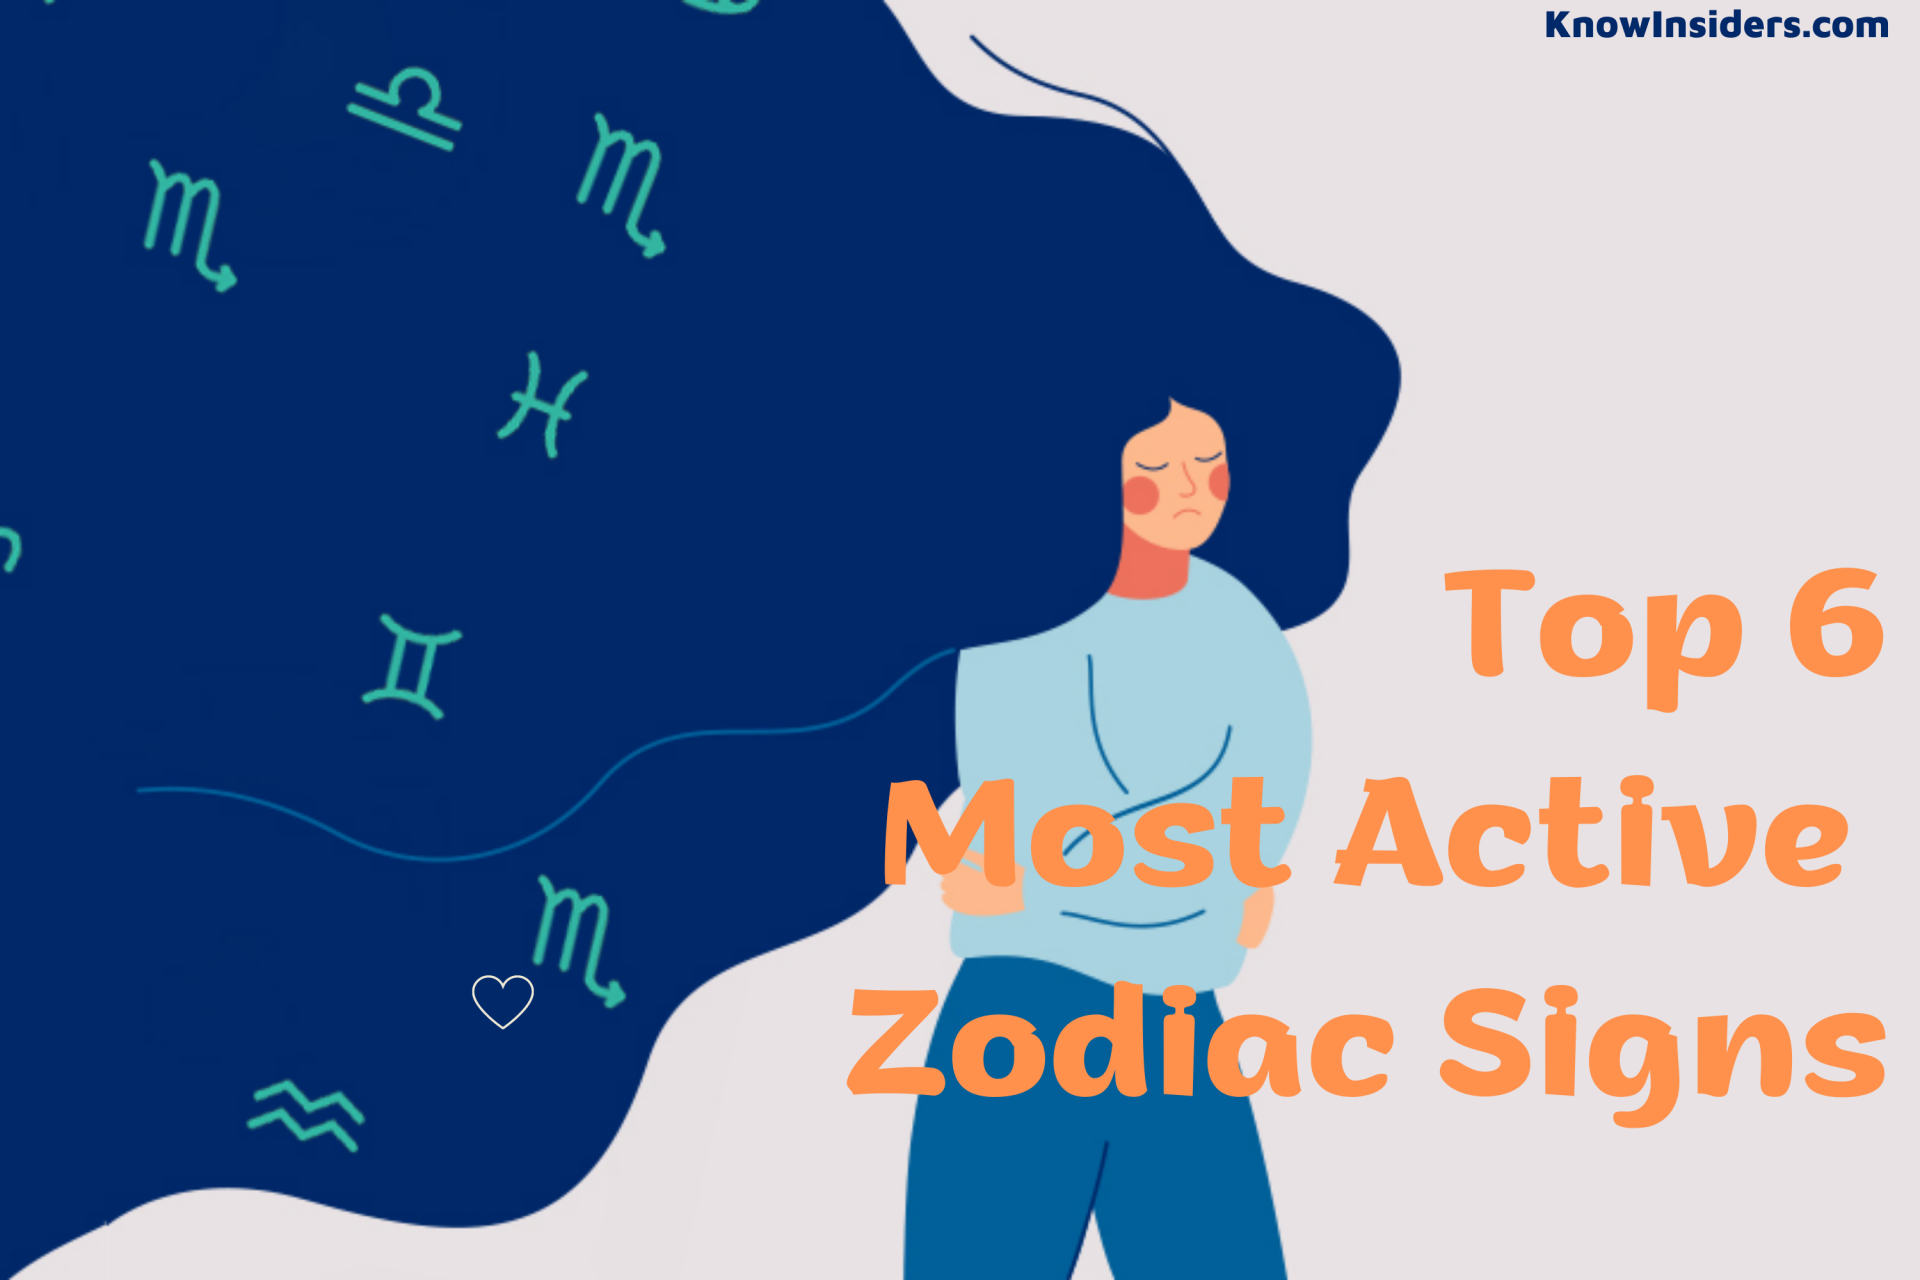 Top 6 Most Active Zodiac Signs - According To Astrology